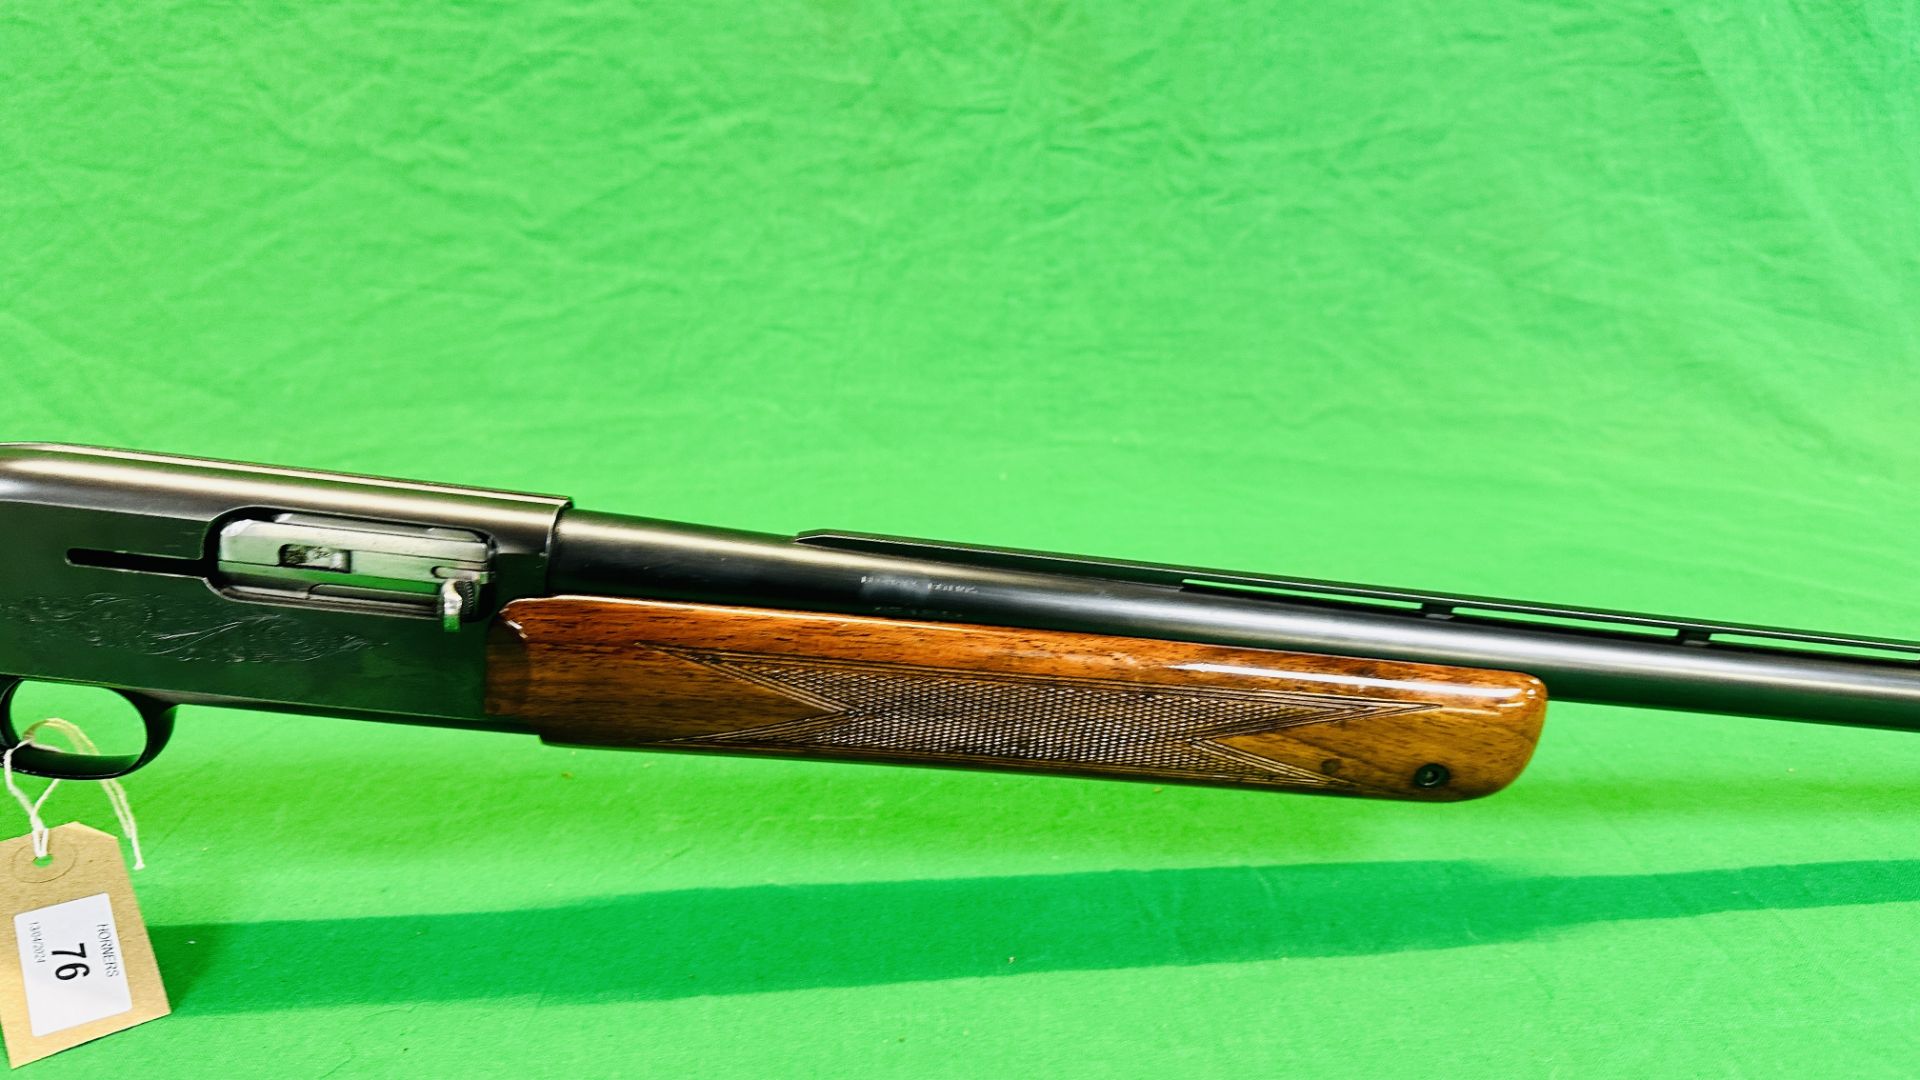 FABRIQUE 12 BORE SELF LOADING TWO SHOT SHOTGUN MODEL "DOUBLE TWO" #C23651 29 INCH BARREL VENTILATED - Image 4 of 15